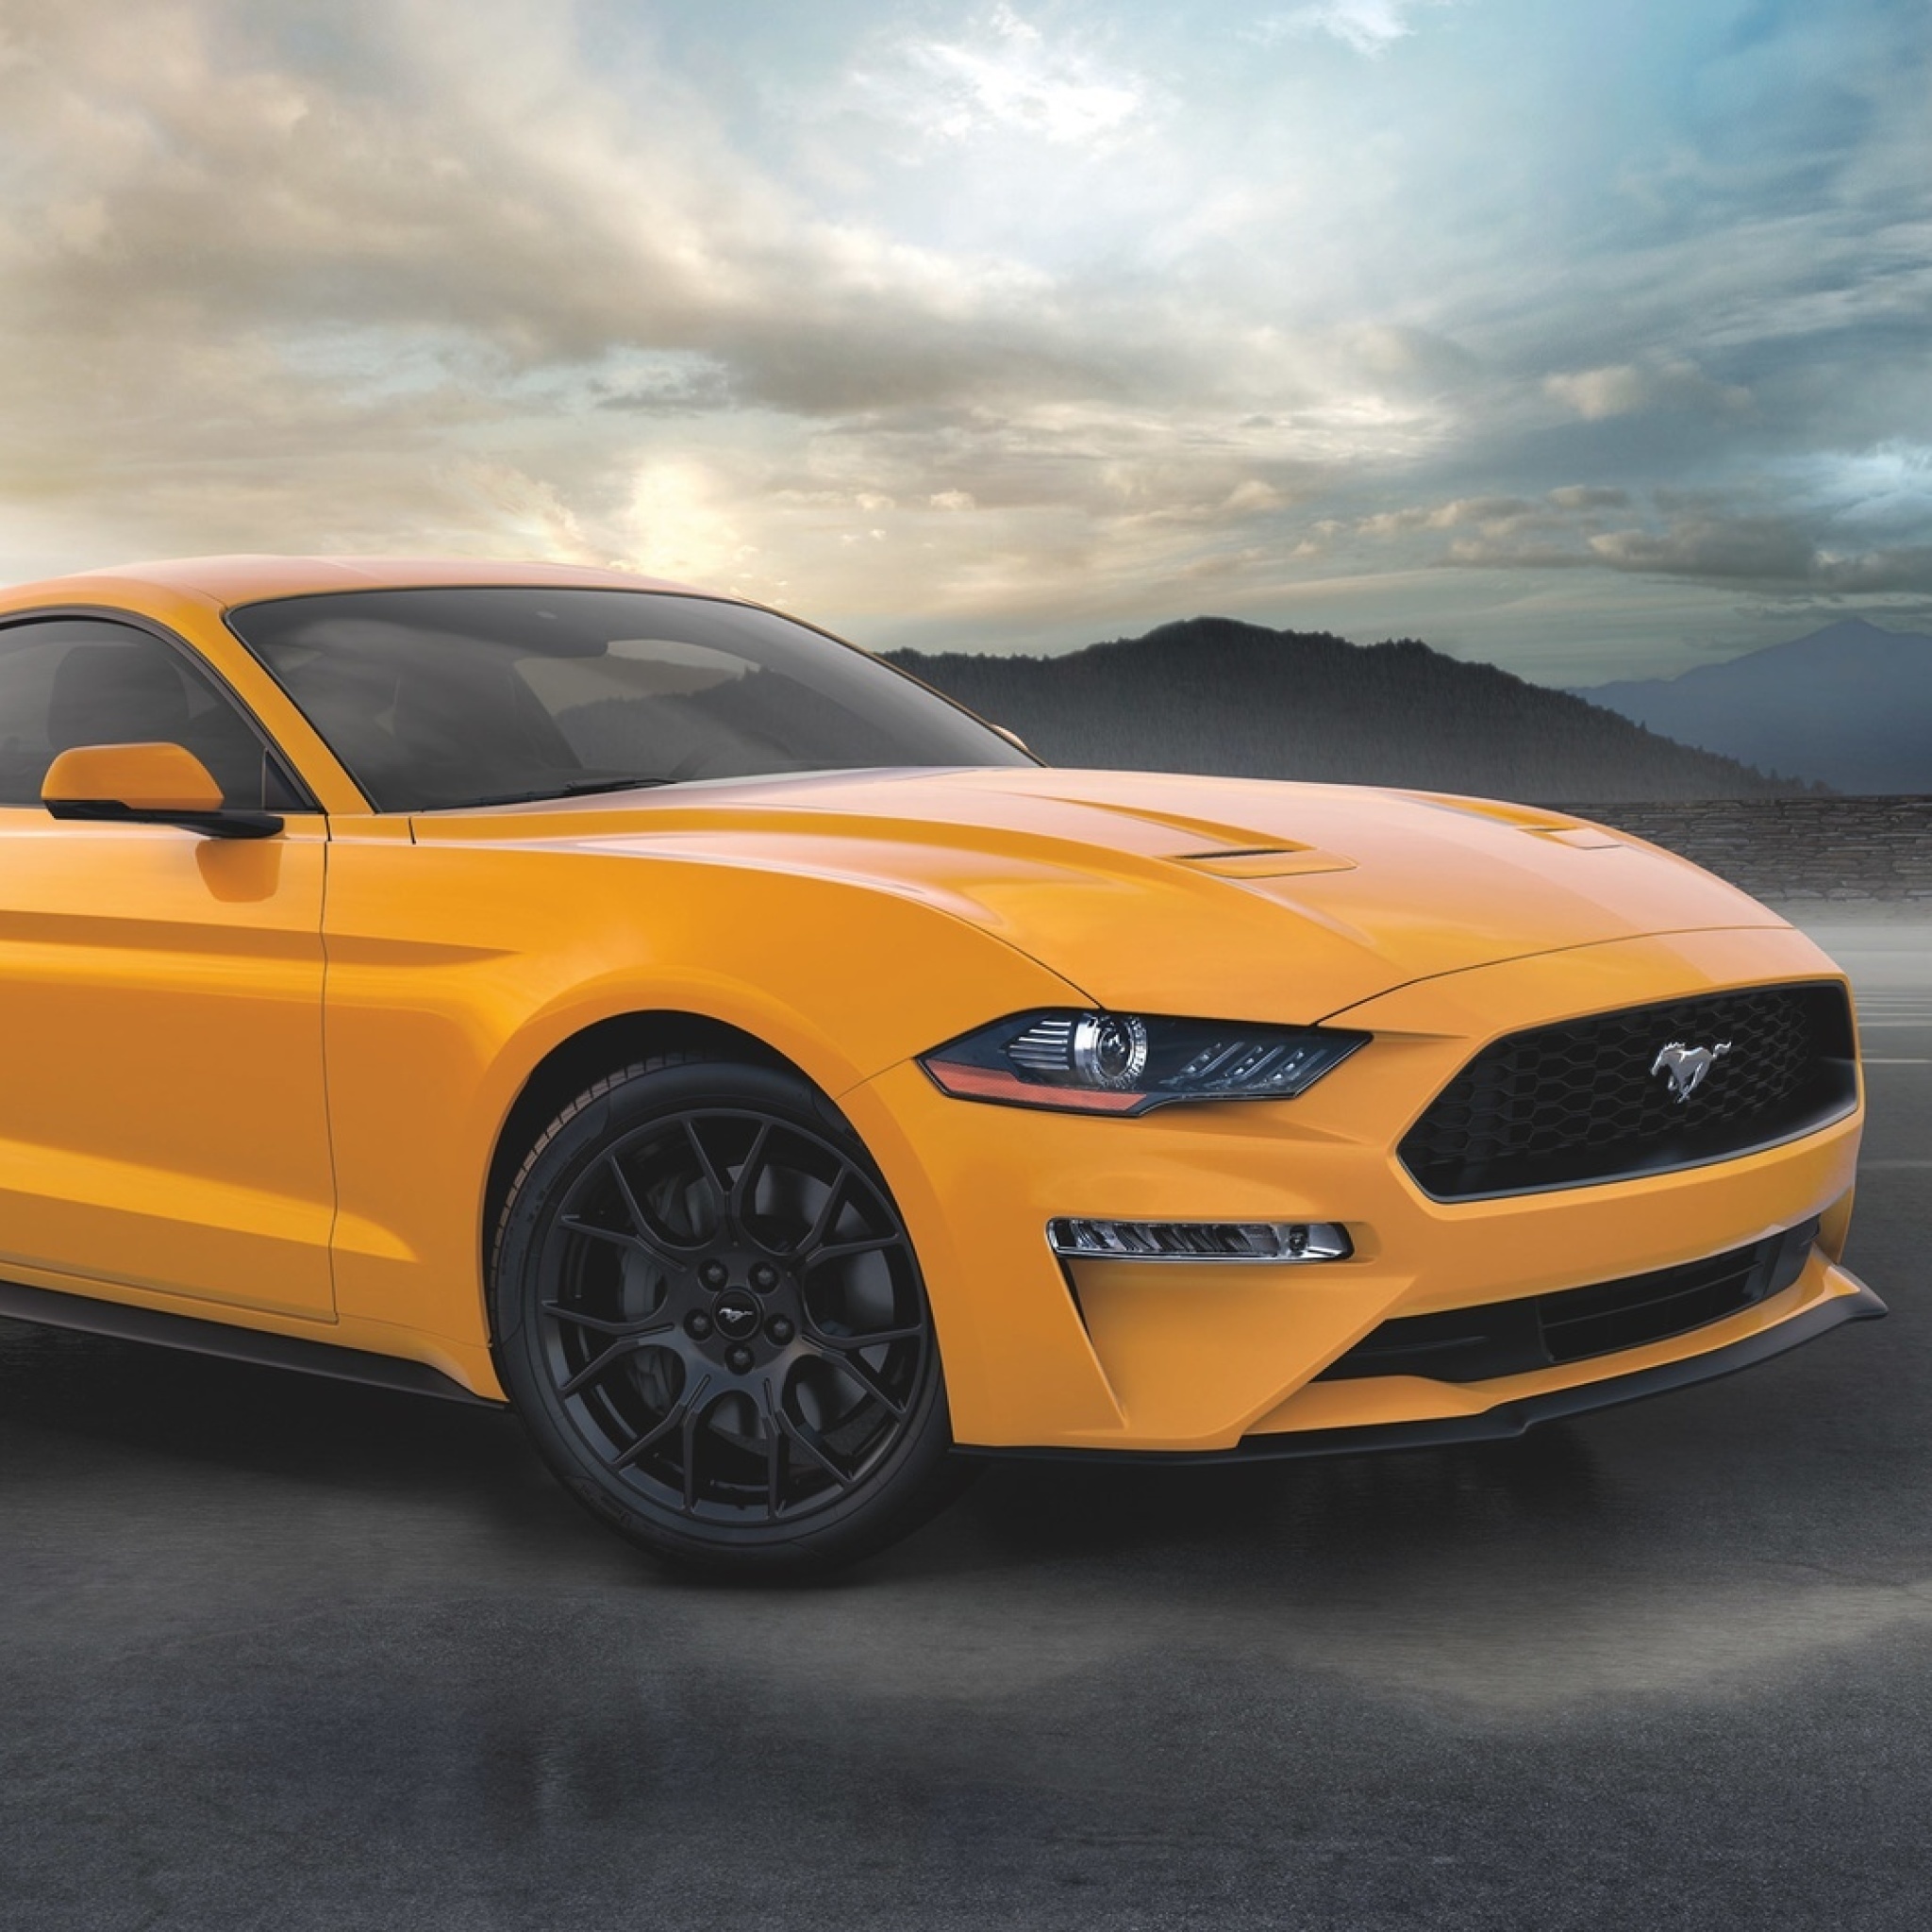 Ford Mustang Coupe wallpaper 2048x2048